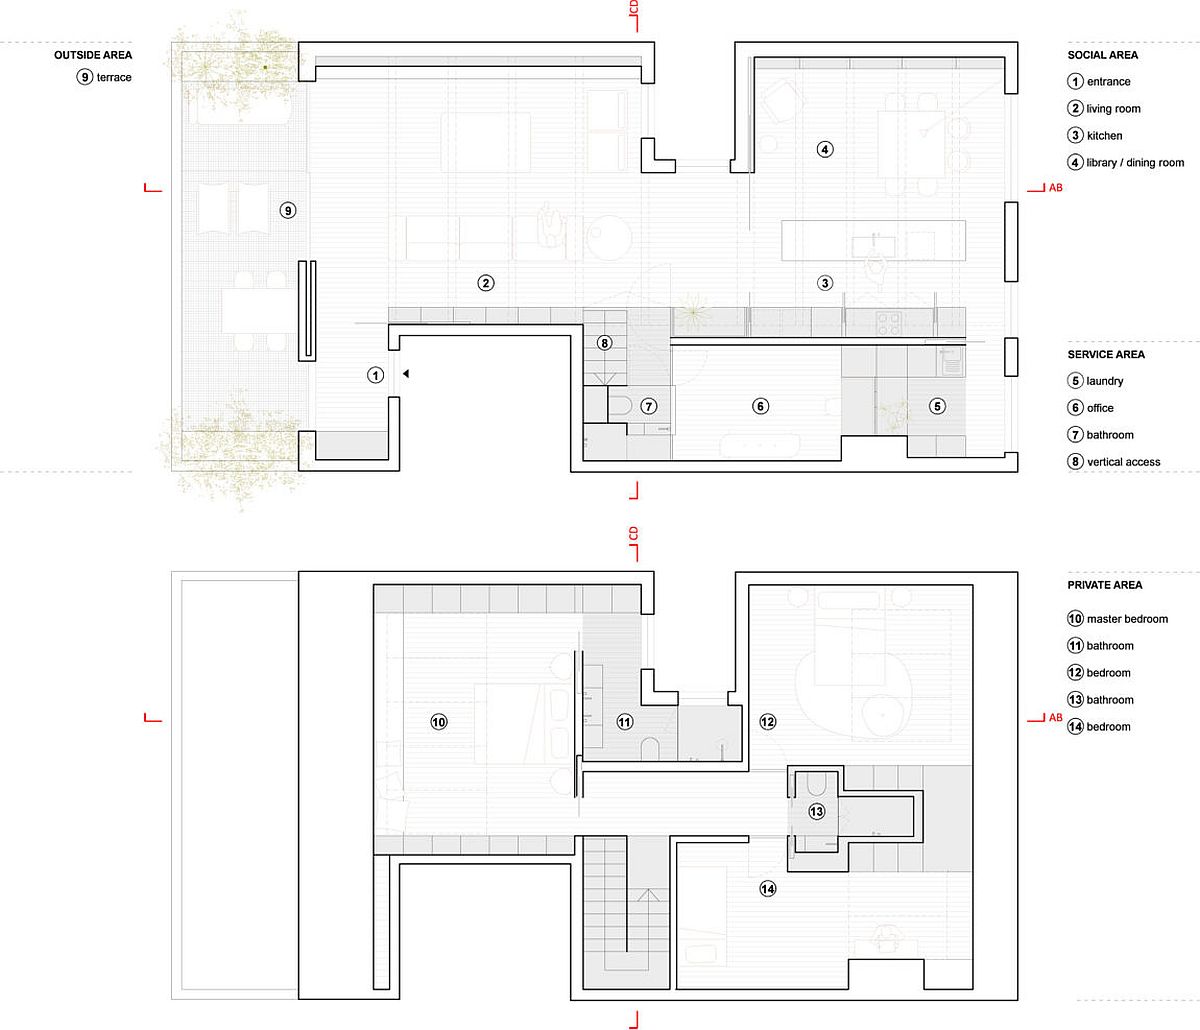 Floor plan of twin level penthouse apartment in Lisbon